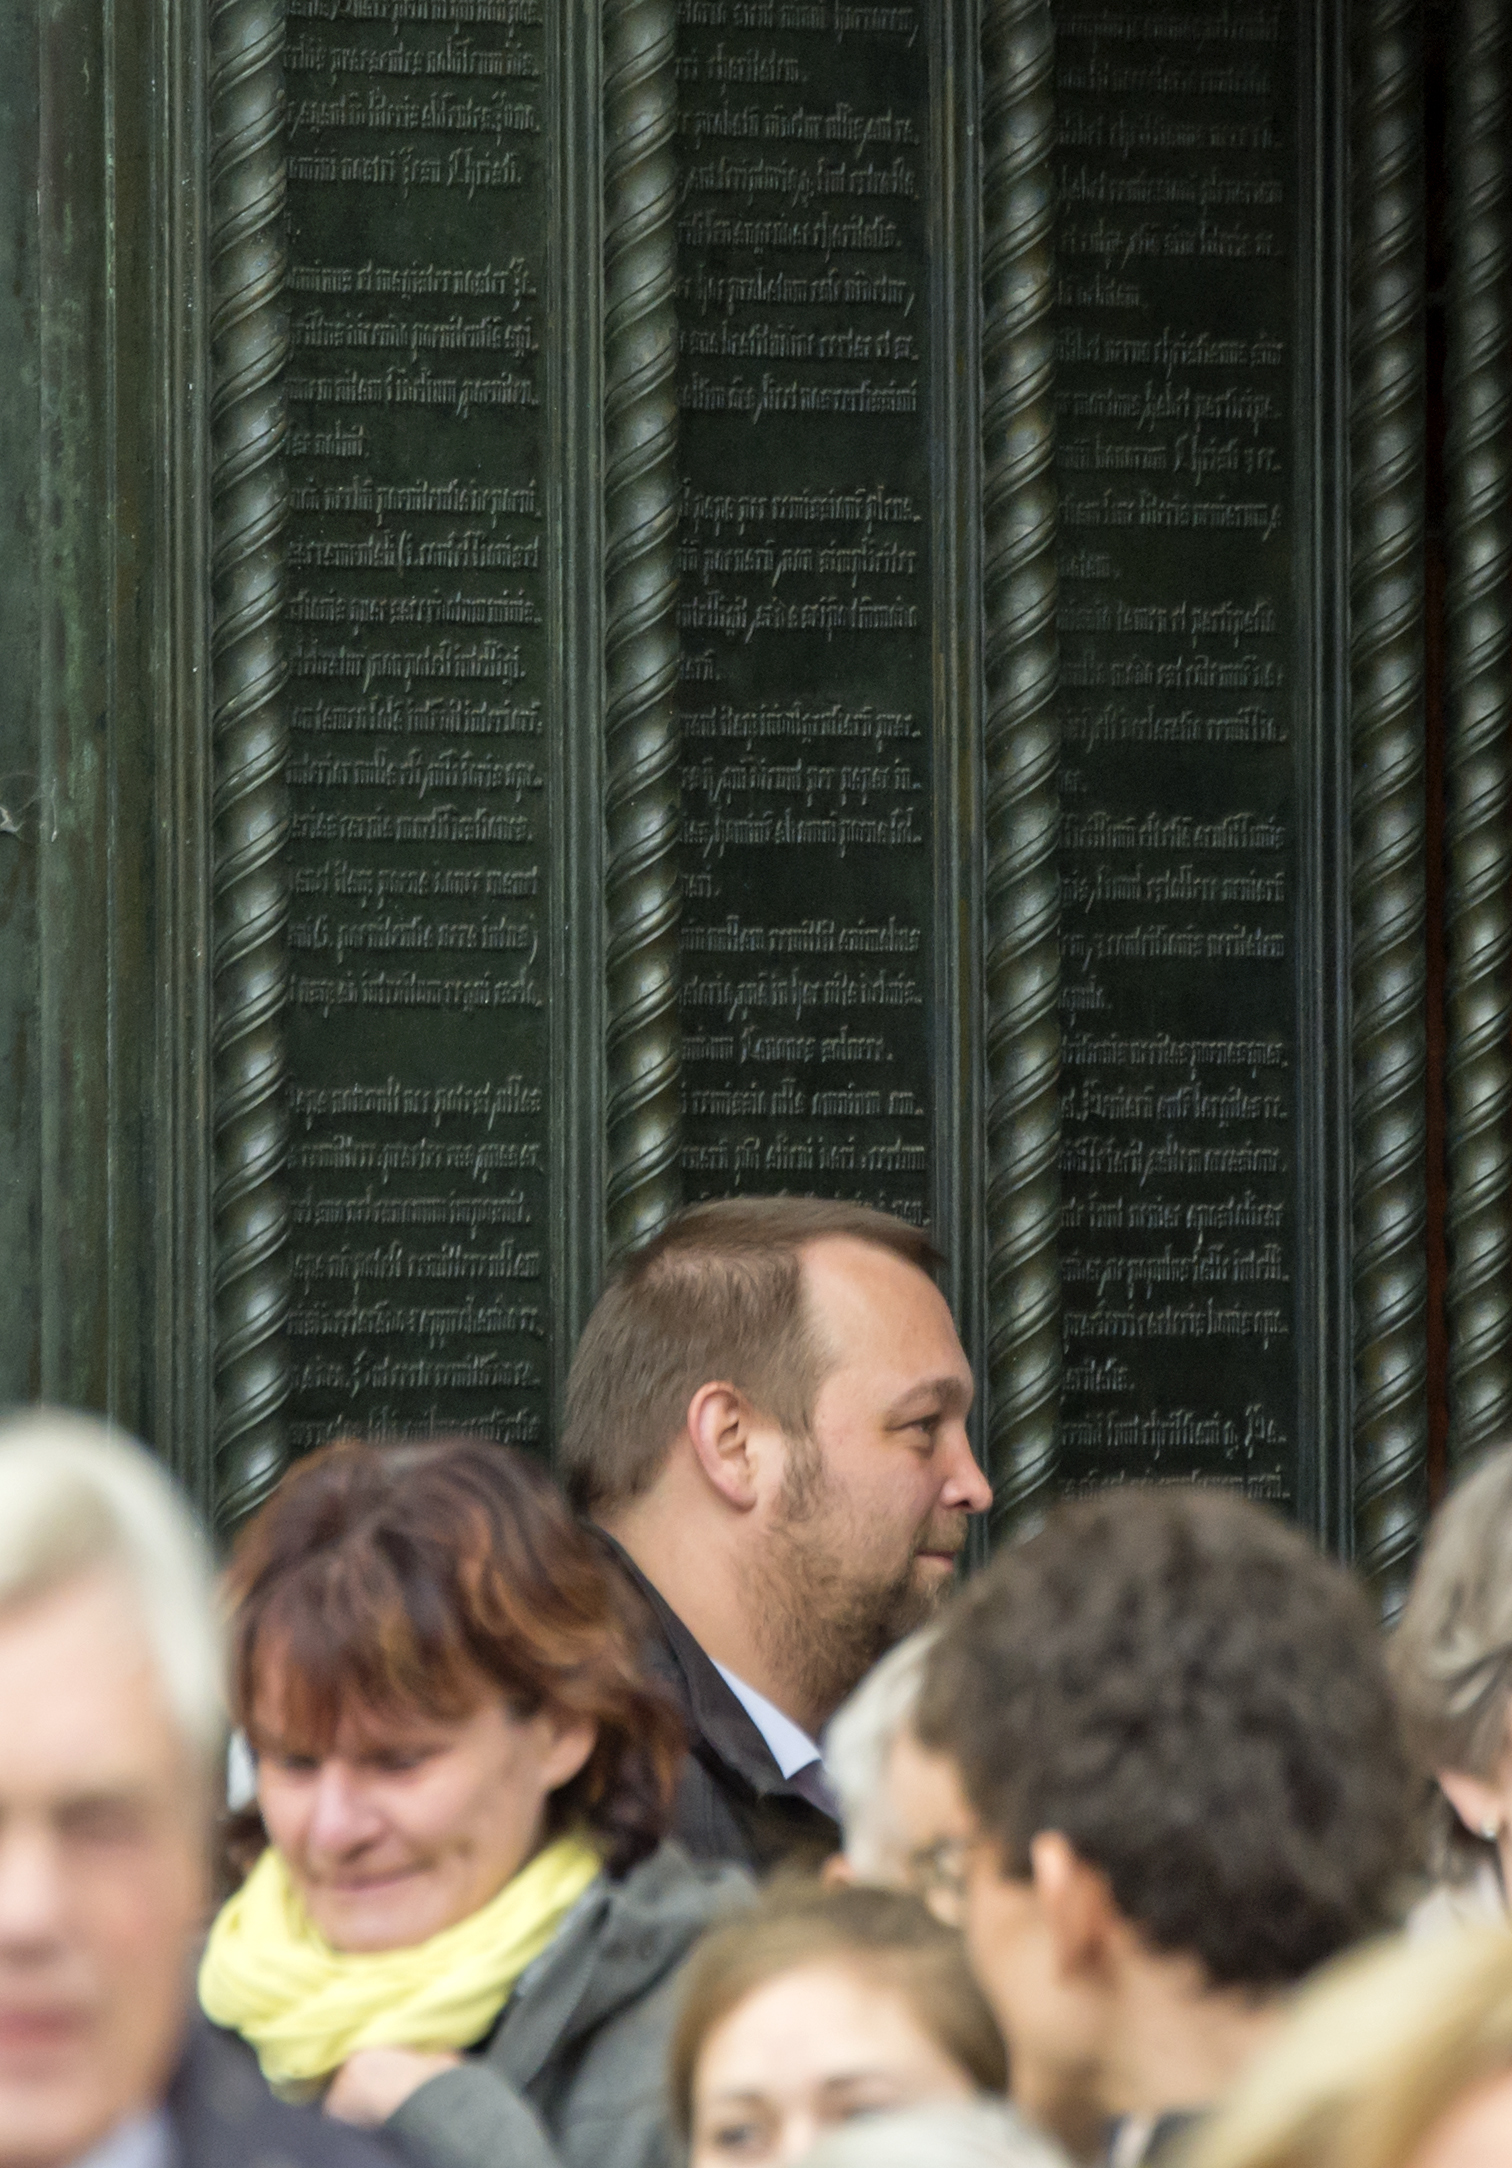 Believers leave after a public service in front of Luther's theses door on the occasion the 500th Anniversary of the Reformation in the Castle Church Wittenberg, Germany, Tuesday, Oct. 31, 2017.  German leaders will mark the 500th anniversary of the day Martin Luther is said to have nailed his theses challenging the Catholic Church's practice of selling indulgences to a church door, a starting point of the Reformation.  (AP Photo/Jens Meyer)